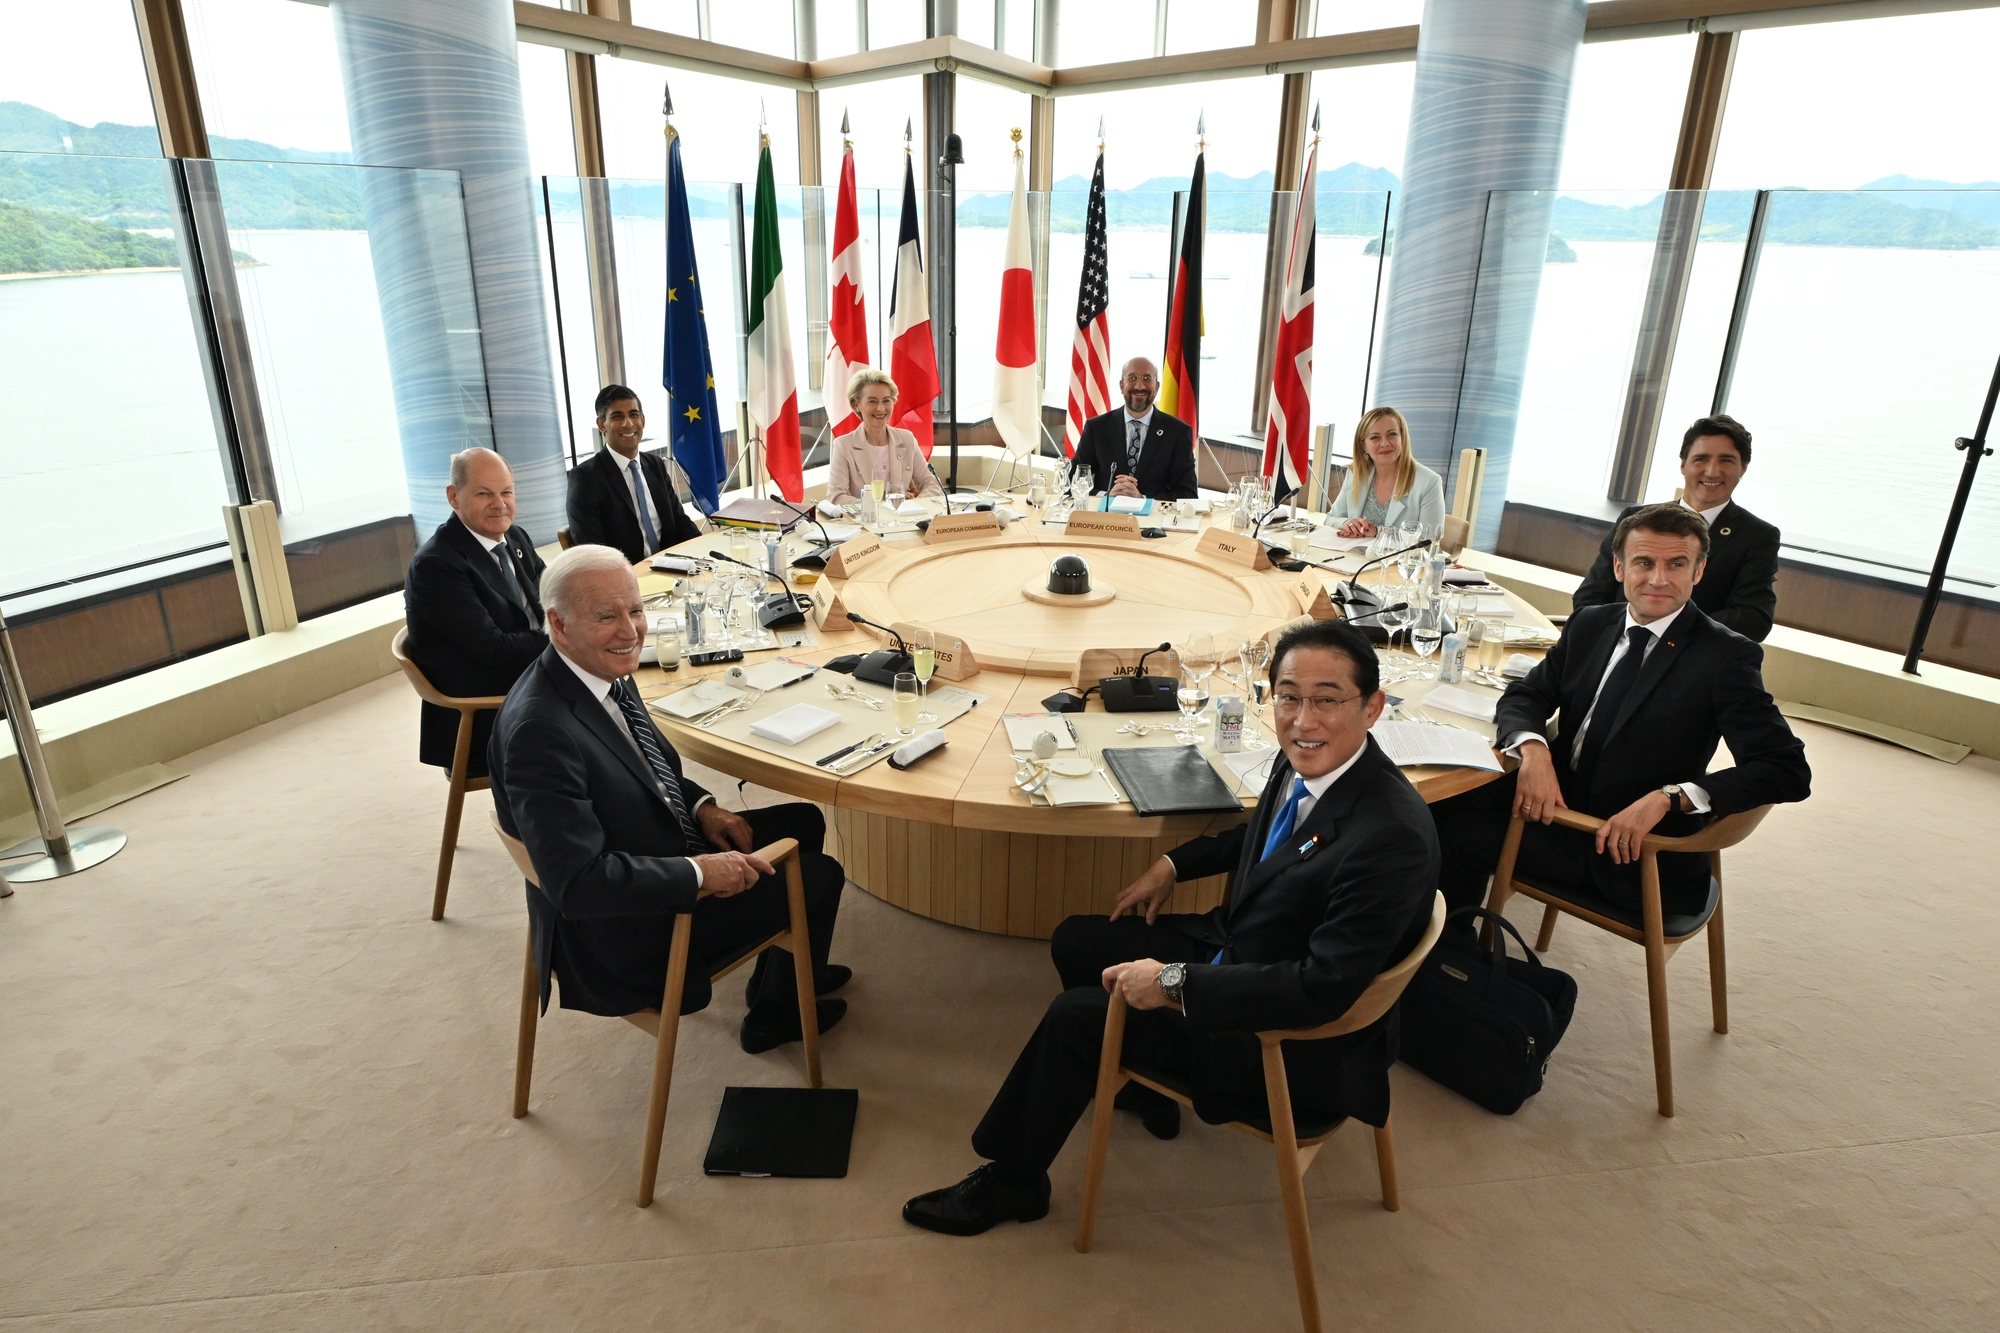 epa10638156 A handout photo made available by the G7 Hiroshima Summit Host shows (L-R) US President Joe Biden, German Chancellor Olaf Scholz, Britain&#039;s Prime Minister Rishi Sunak, European Commission President Ursula von der Leyen, President of the European Council Charles Michel, Italian Prime Minister Giorgia Meloni, Canadian Prime Minister Justin Trudeau, French President Emmanuel Macron and Japan&#039;s Prime Minister Fumio Kishida posing for a photo during a working lunch meeting during the G7 Hiroshima Summit in Hiroshima, Japan, 19  May 2023. The G7 Hiroshima Summit will be held from 19 to 21 May 2023.  EPA/G7 Hiroshima Summit Host  HANDOUT EDITORIAL USE ONLY/NO SALES